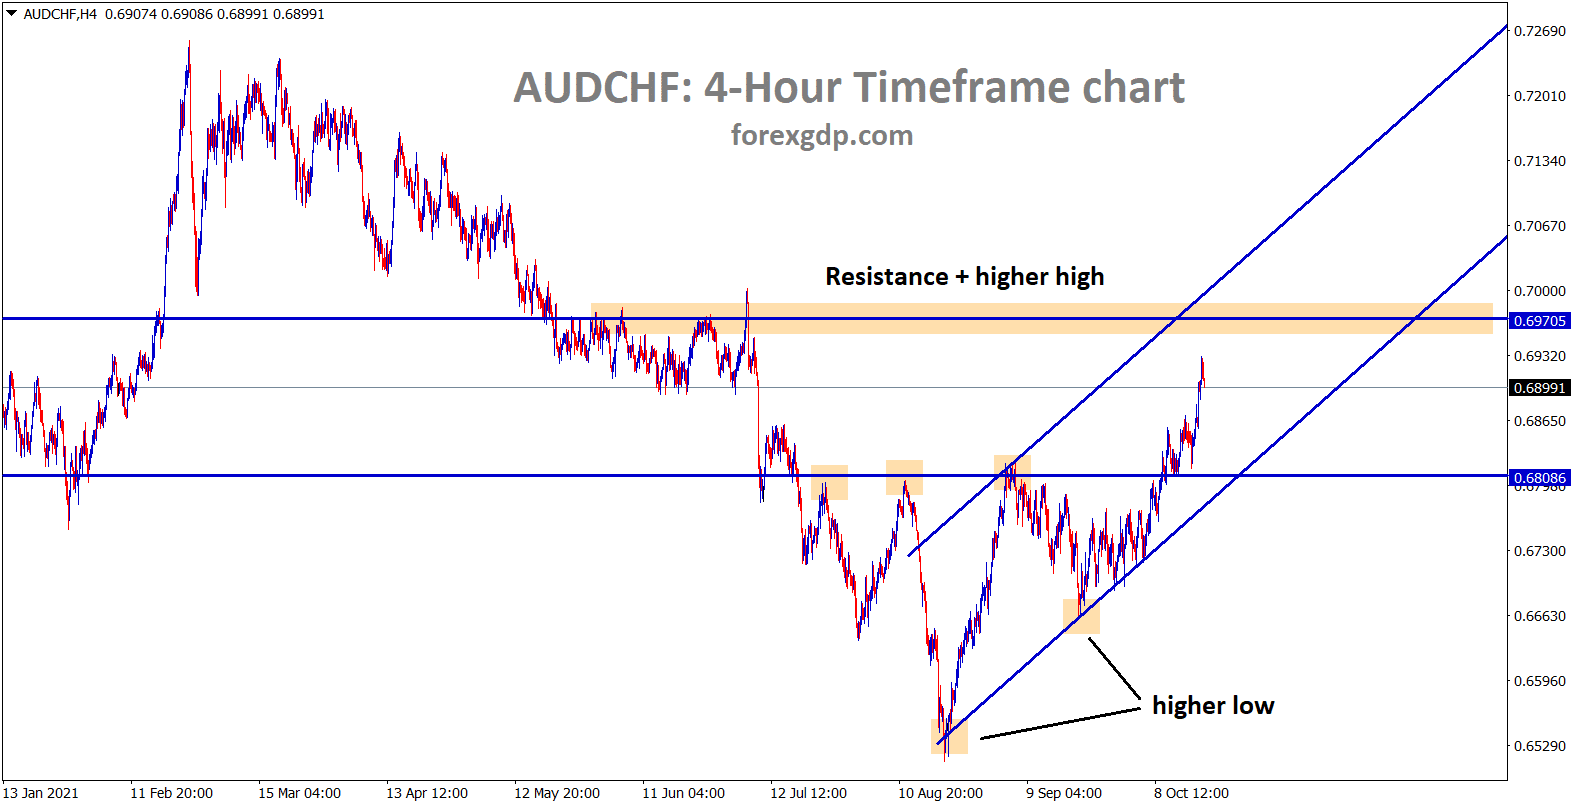 AUDCHF is moving towards the higher high area of the uptrend line and the horizontal resistance area 1